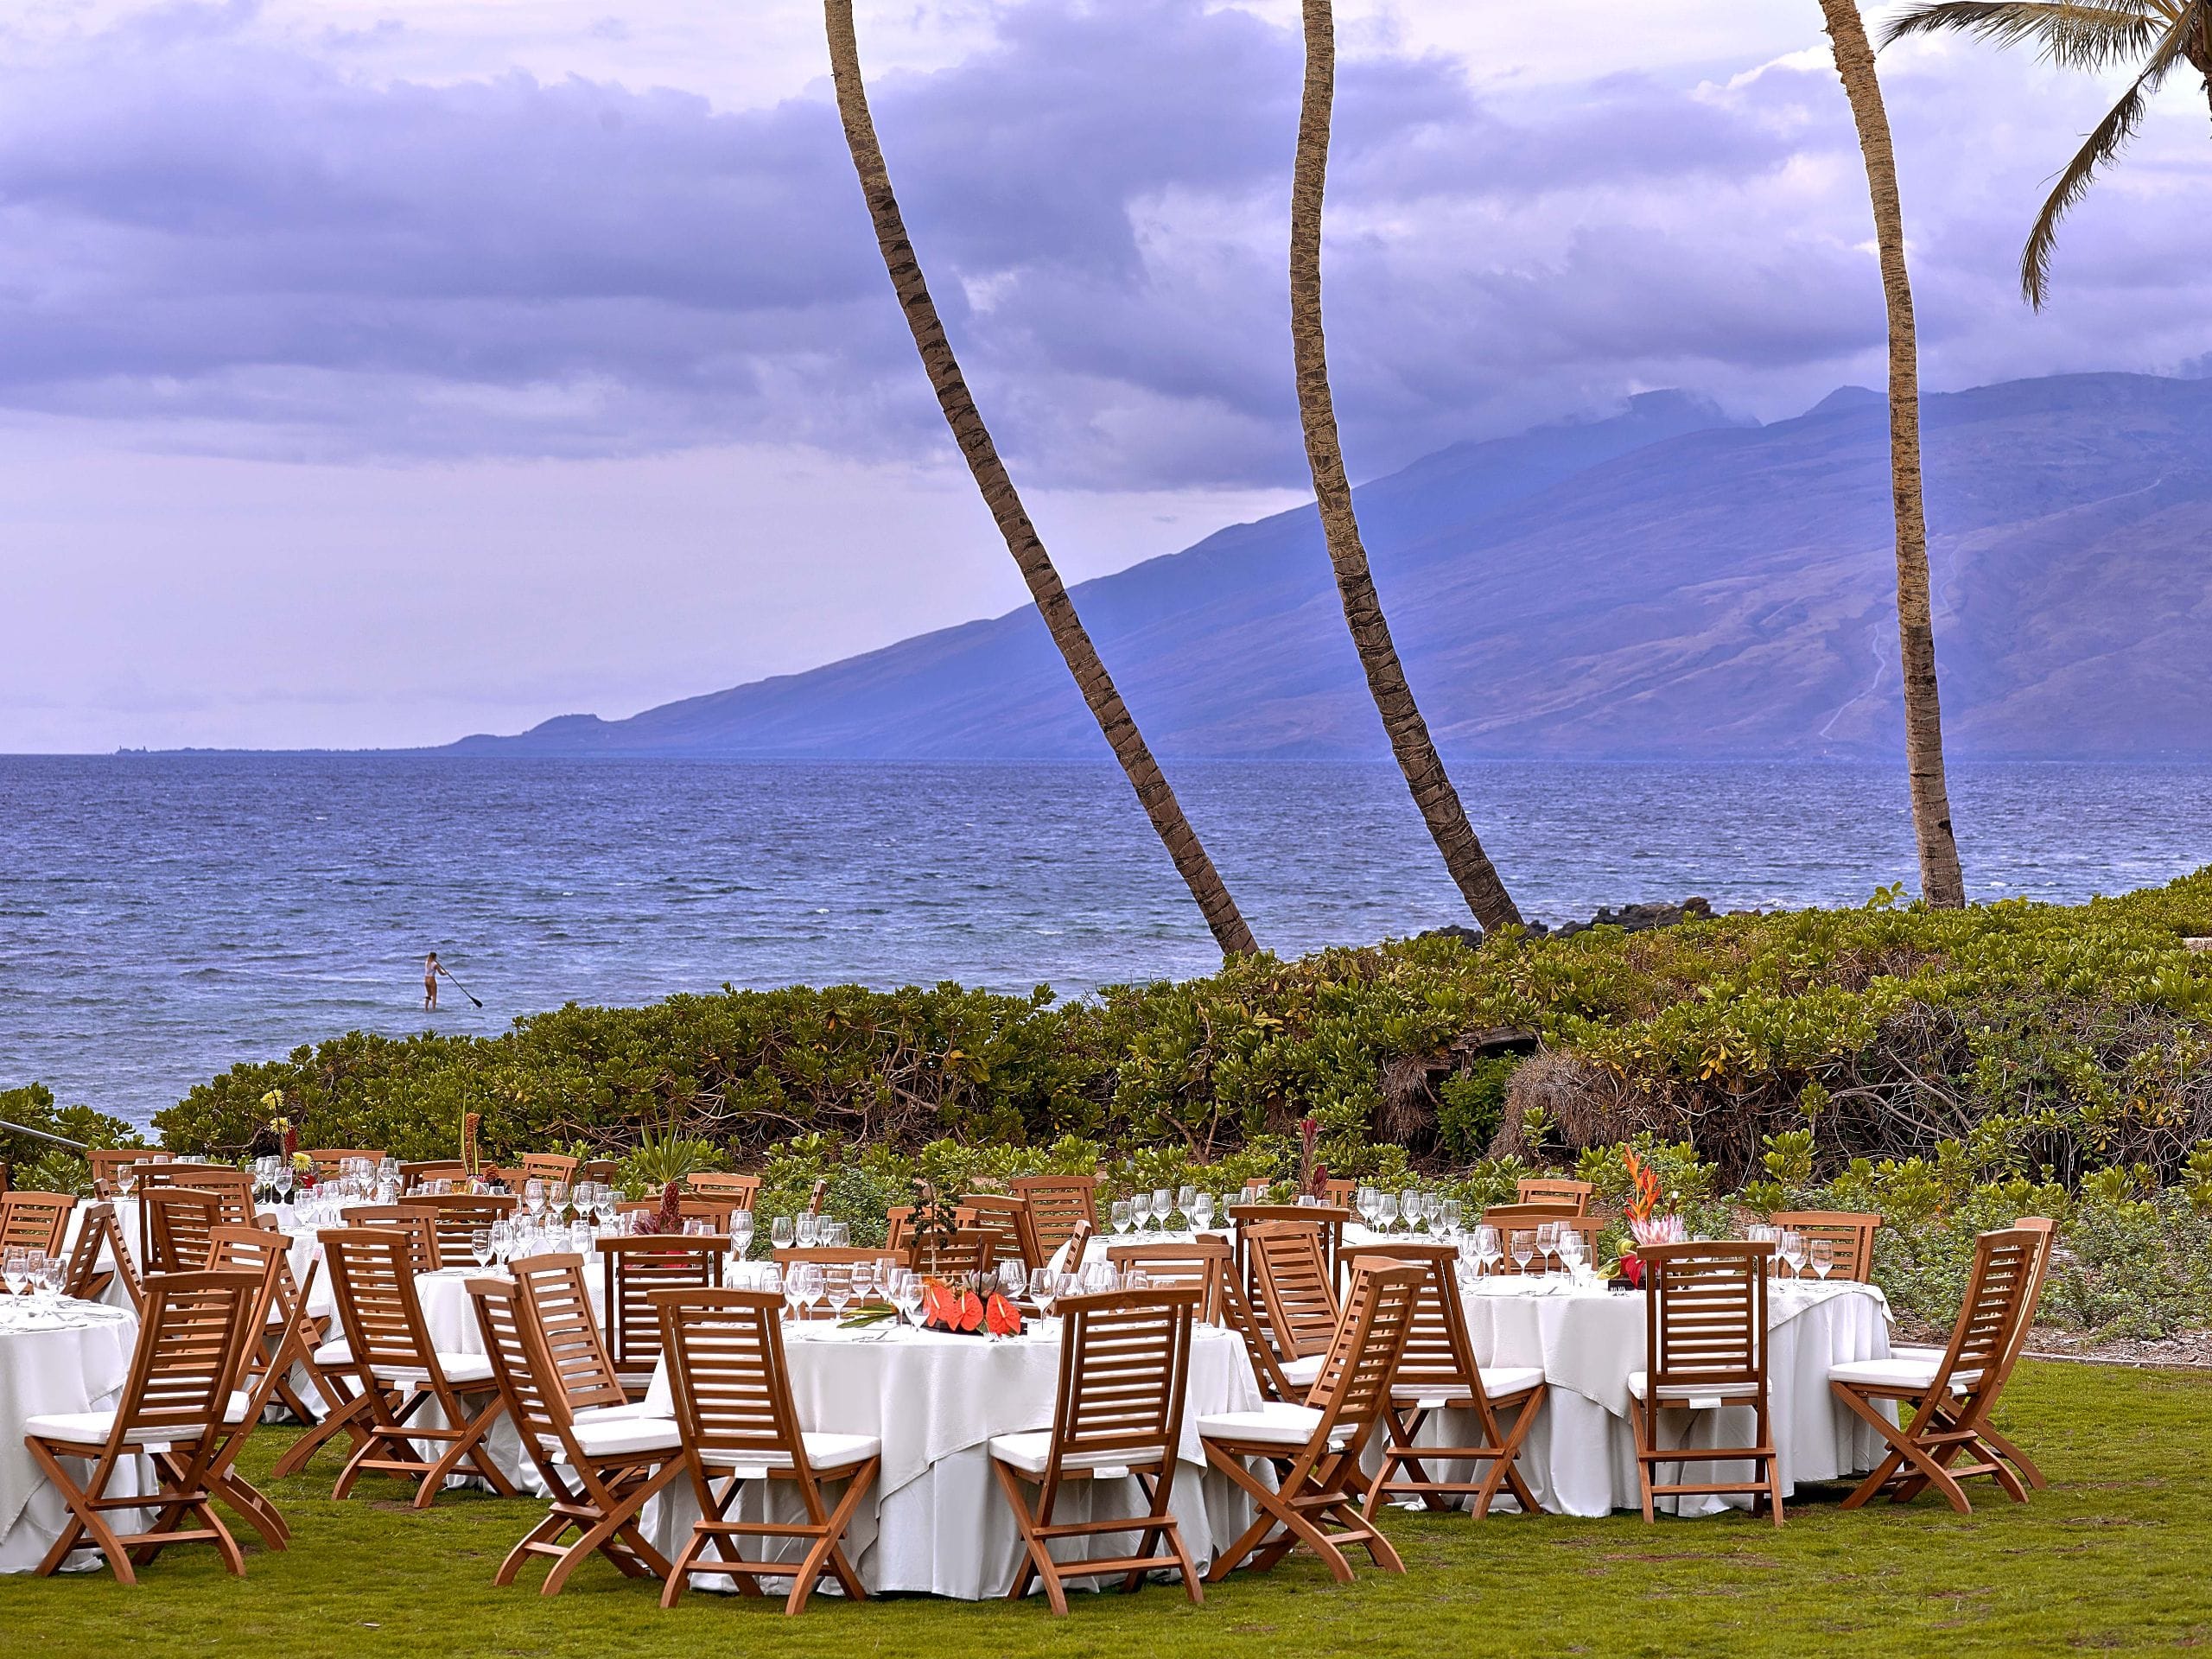 Andaz Maui at Wailea Resort Event Lawn